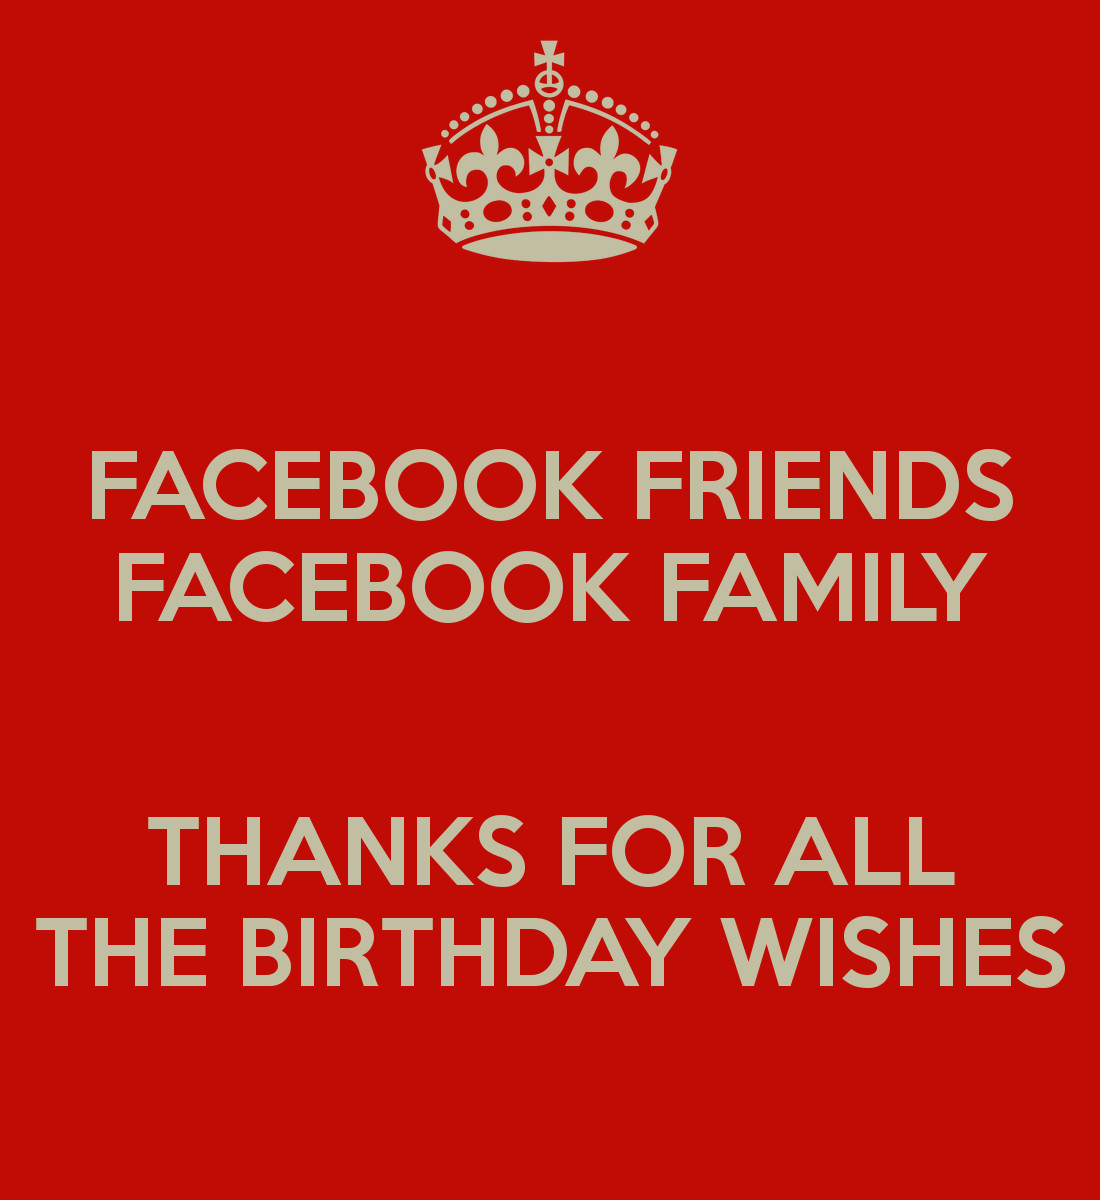 Thanks For All The Birthday Wishes
 FACEBOOK FRIENDS FACEBOOK FAMILY THANKS FOR ALL THE